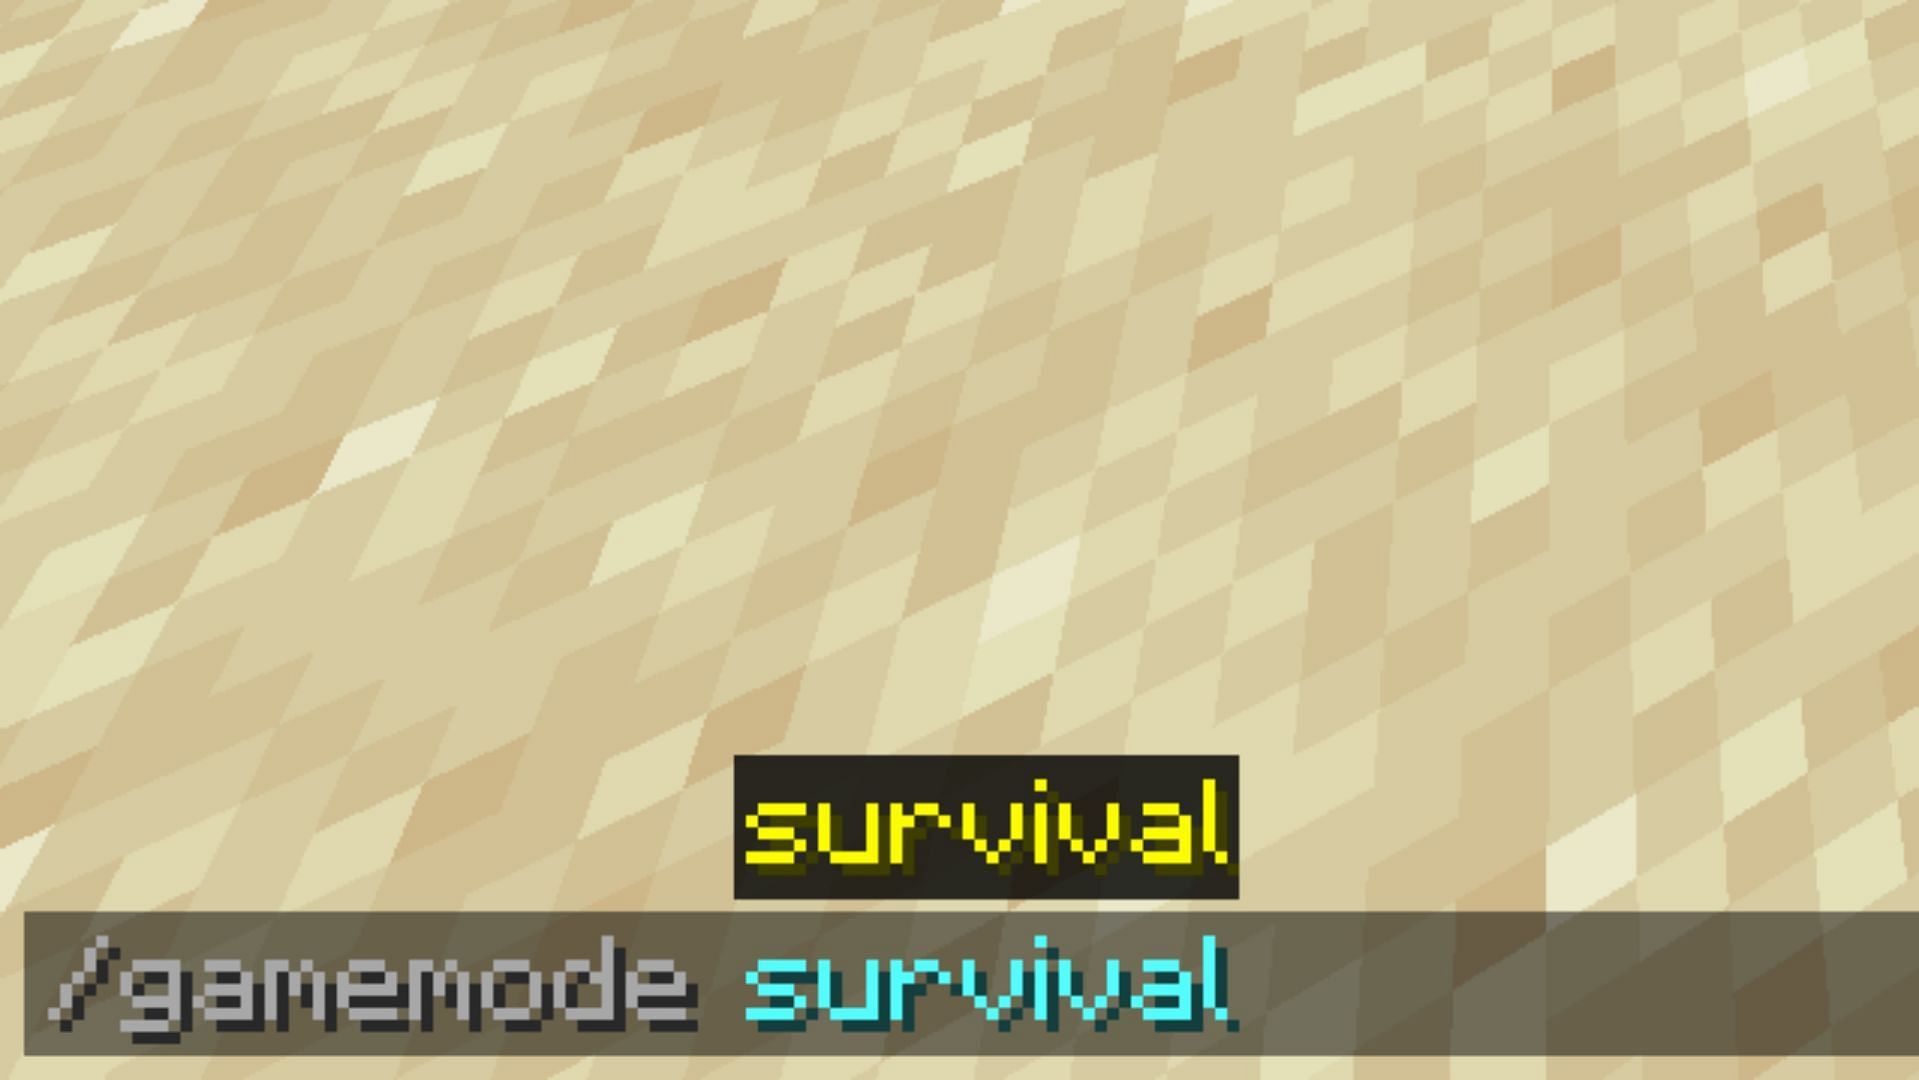 Lastly, you can enter the game mode command and change it to Survival to play in the Minecraft Hardcore world again. (Image via Mojang)